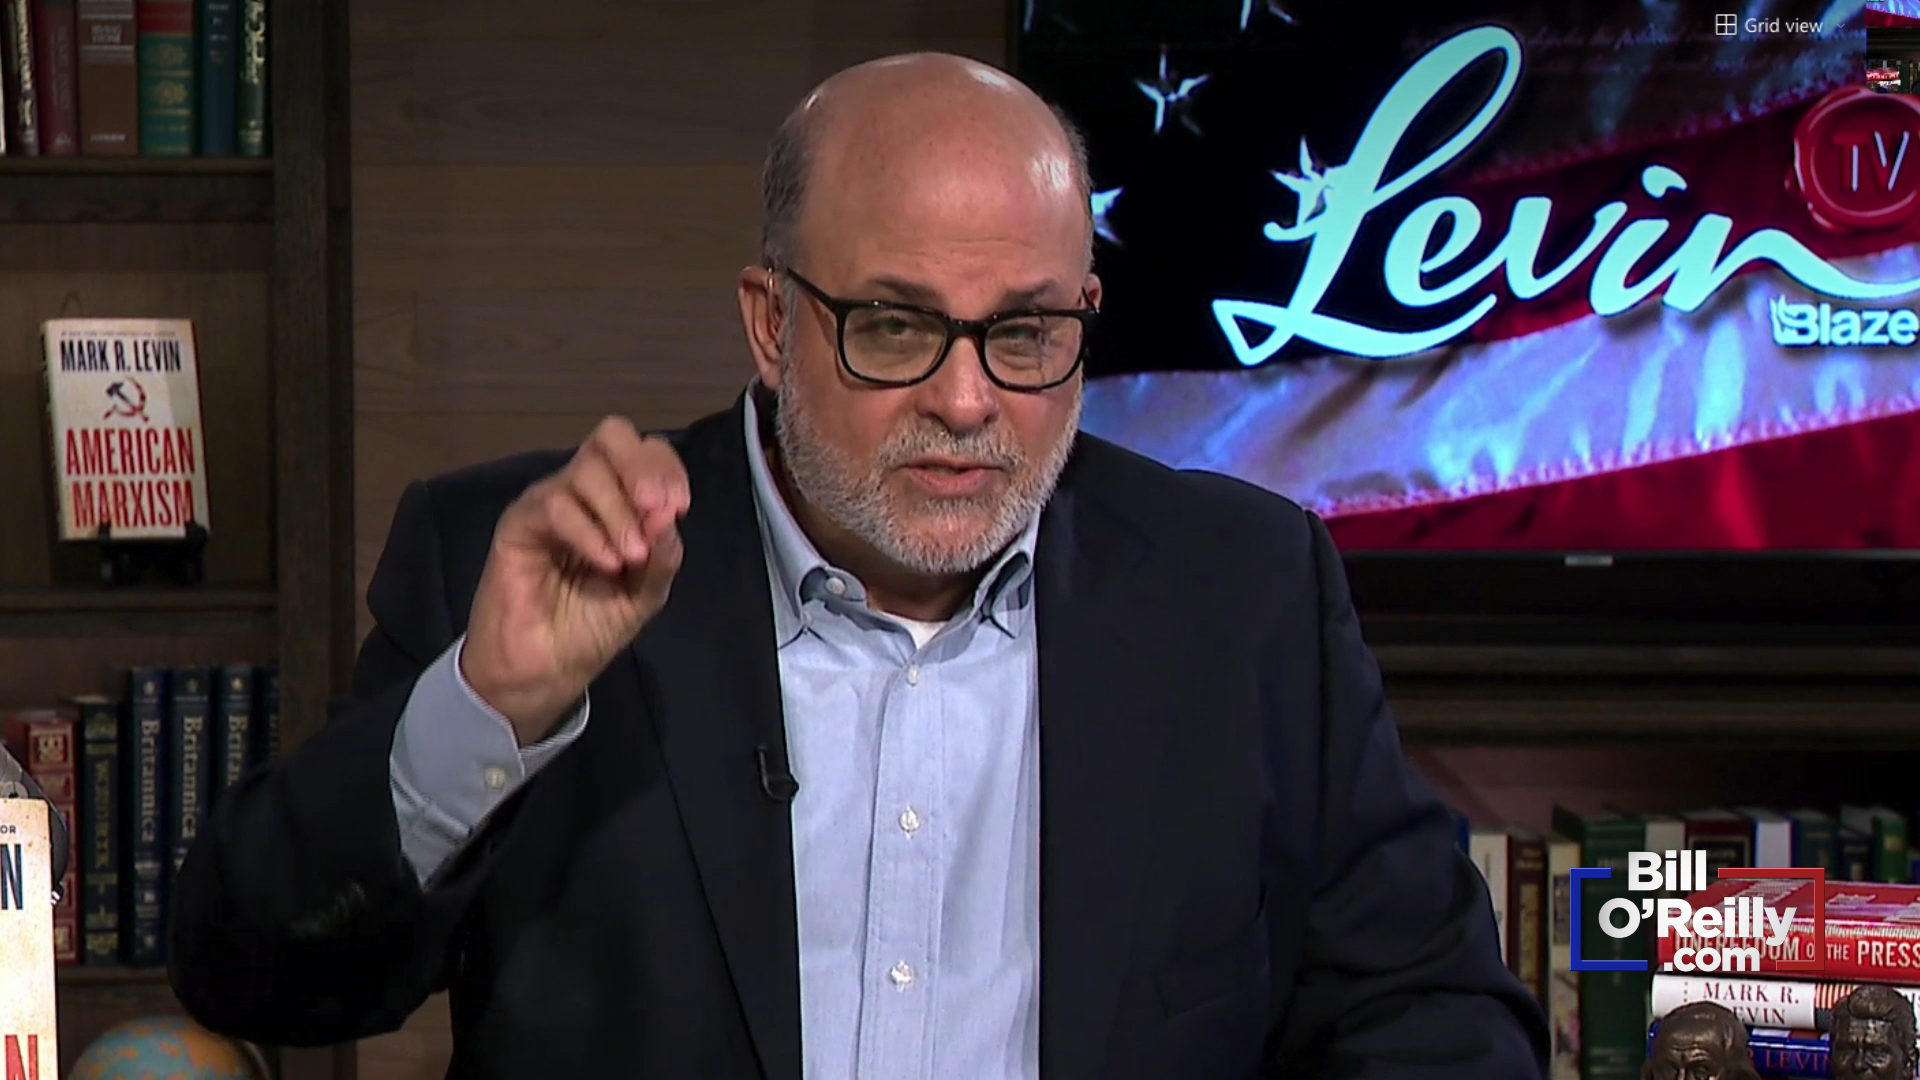 O'Reilly Exclusive: Mark Levin on Joe Biden and the 'Woke' Movement